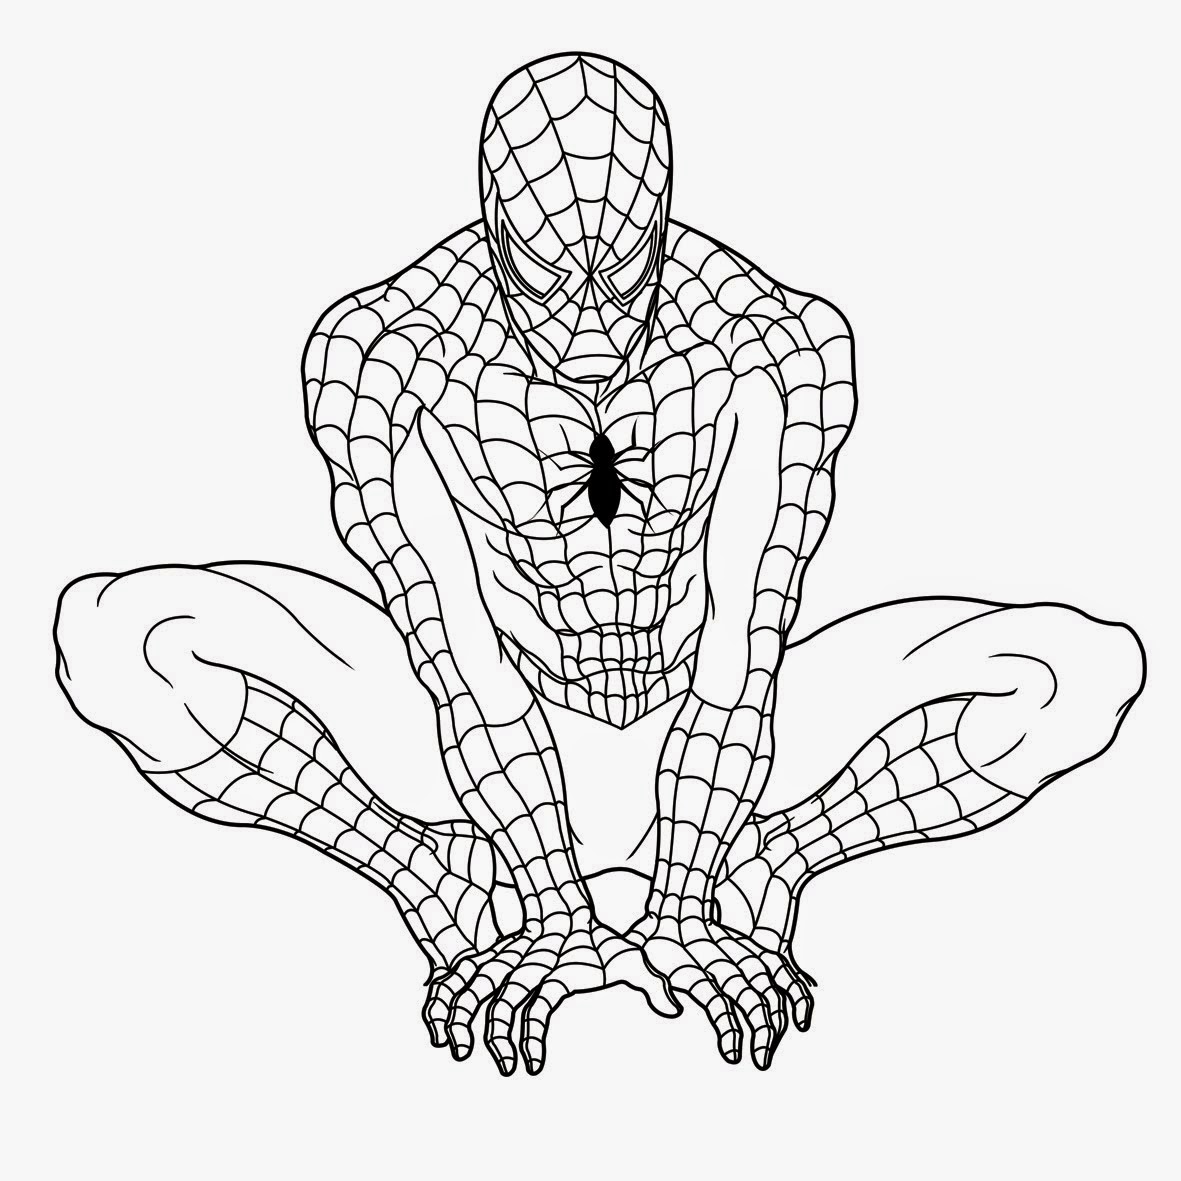 The Printable Spiderman Coloring Drawing Free wallpaper